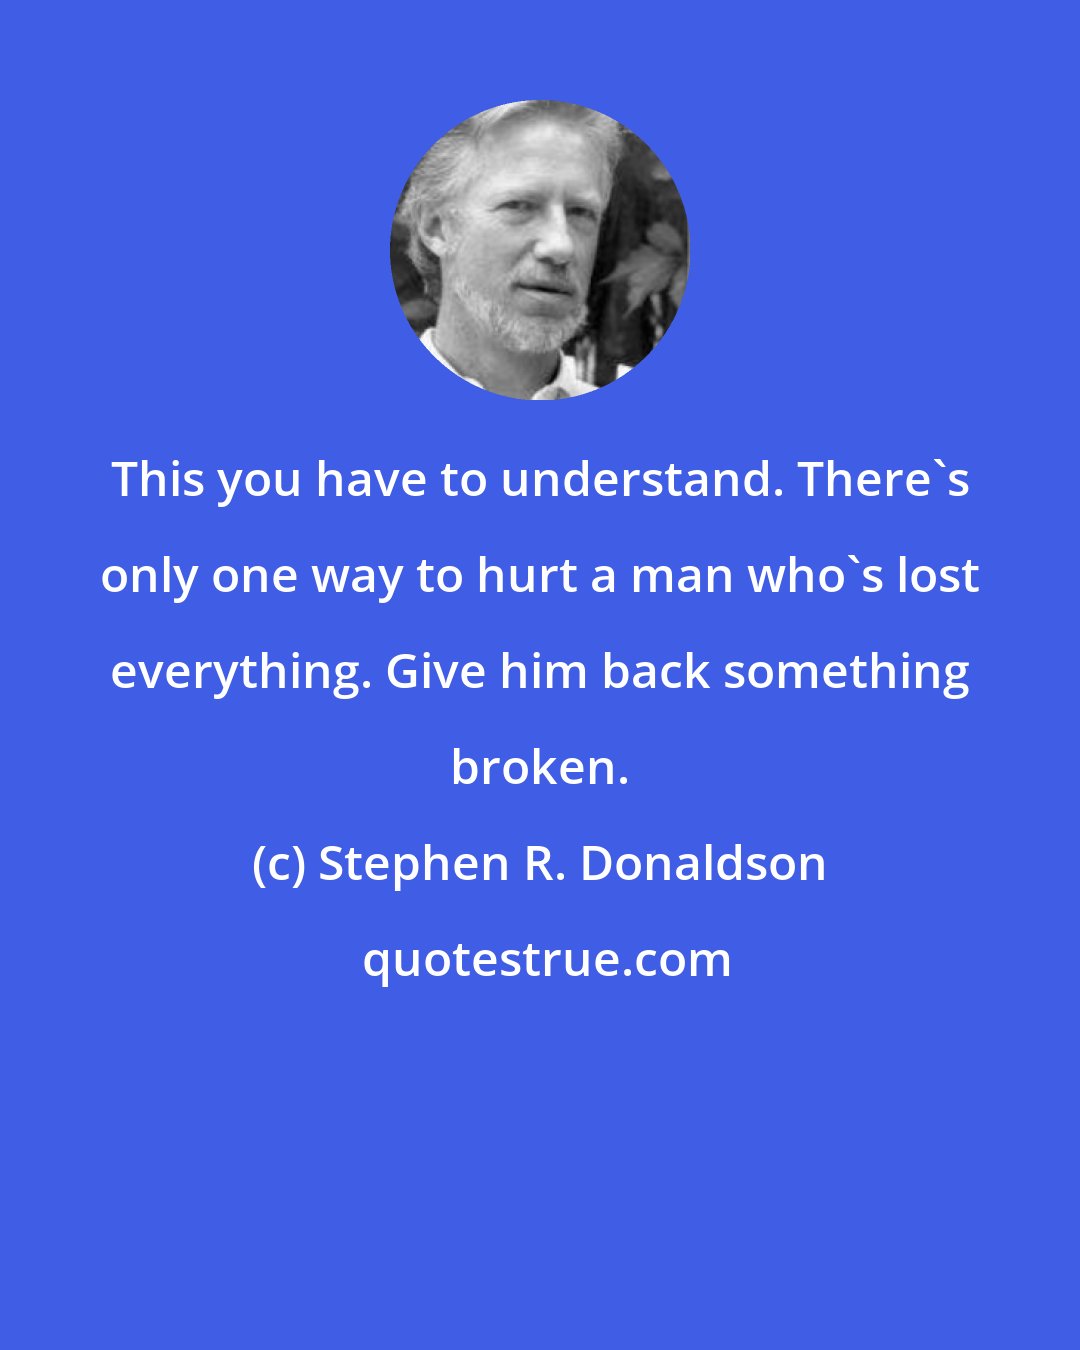 Stephen R. Donaldson: This you have to understand. There's only one way to hurt a man who's lost everything. Give him back something broken.